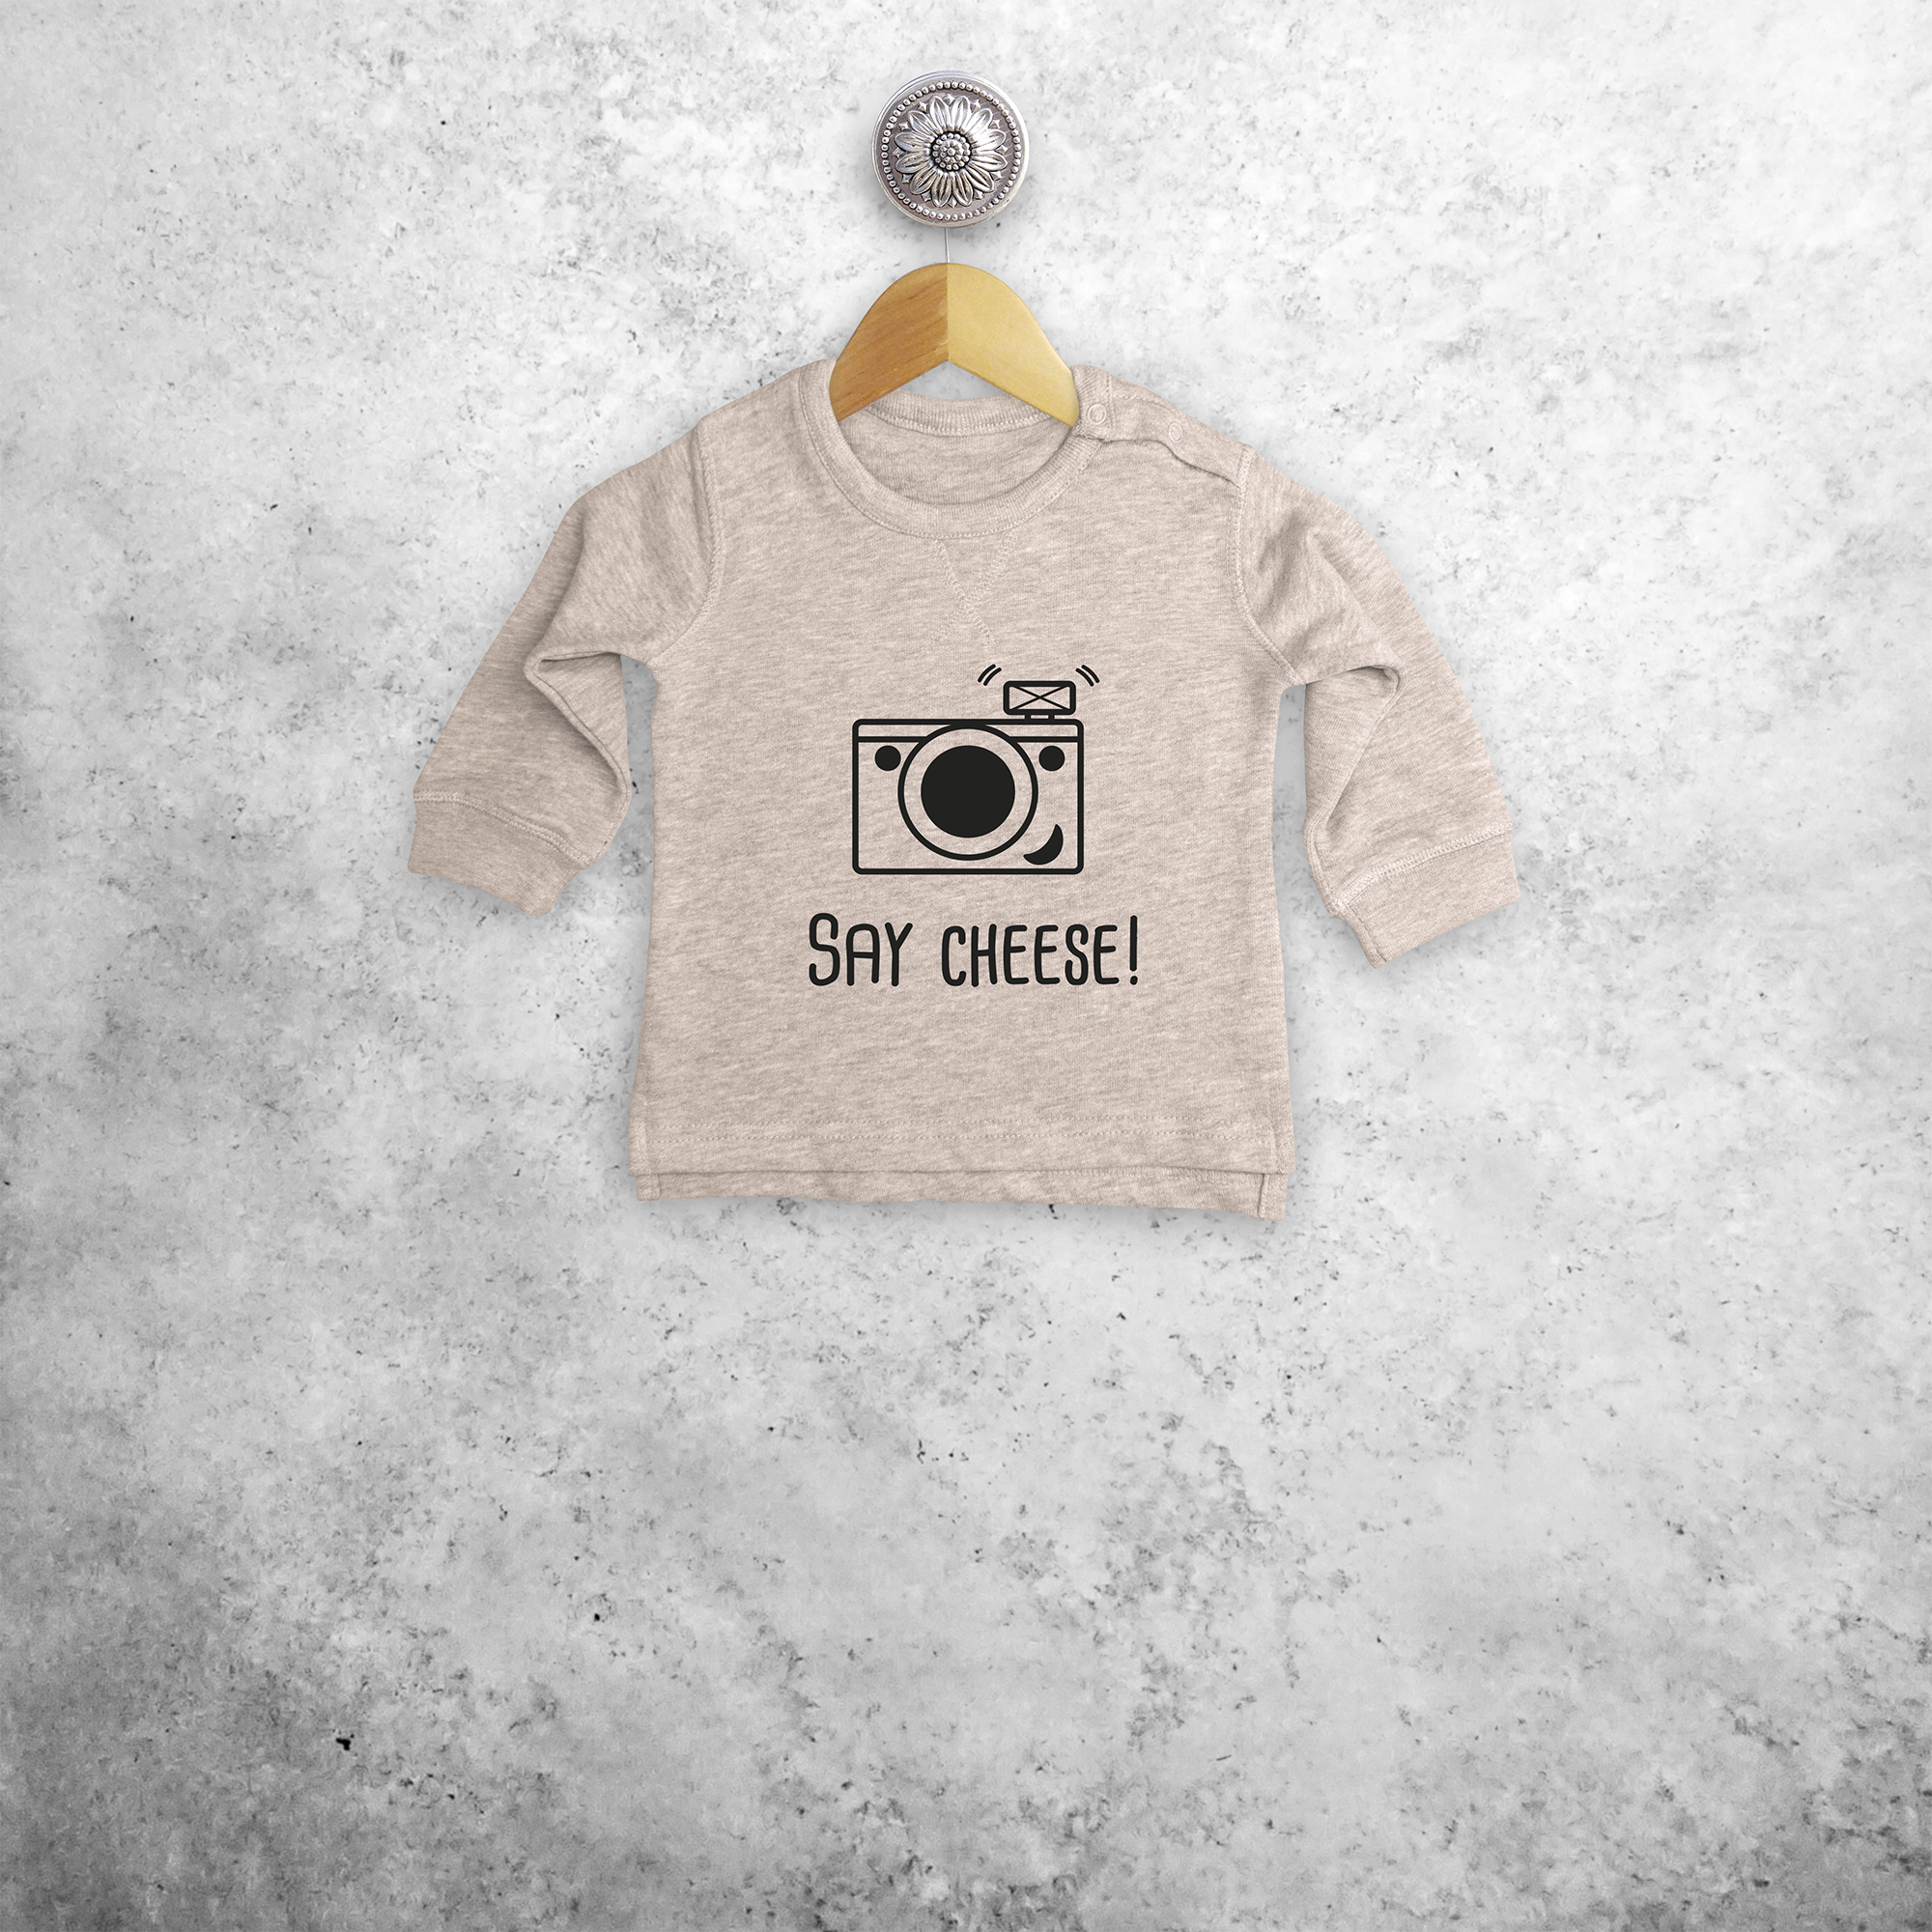 'Say cheese' baby sweater